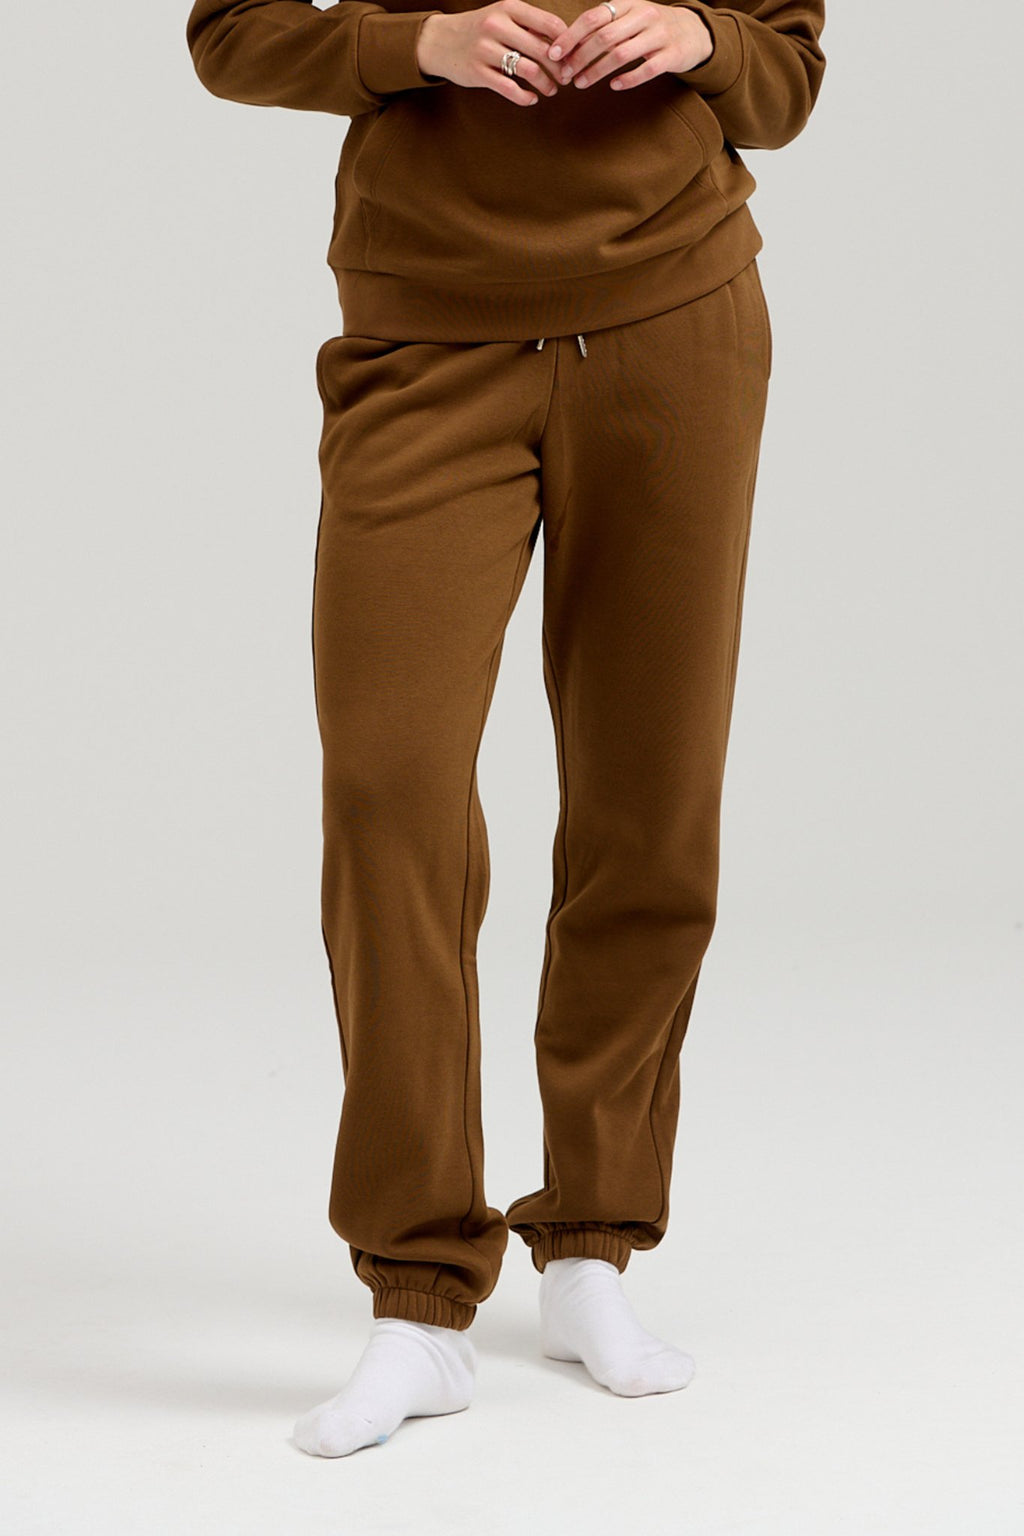 Basic Sweatsuit with Crewneck (Brown) - Package Deal (Women)